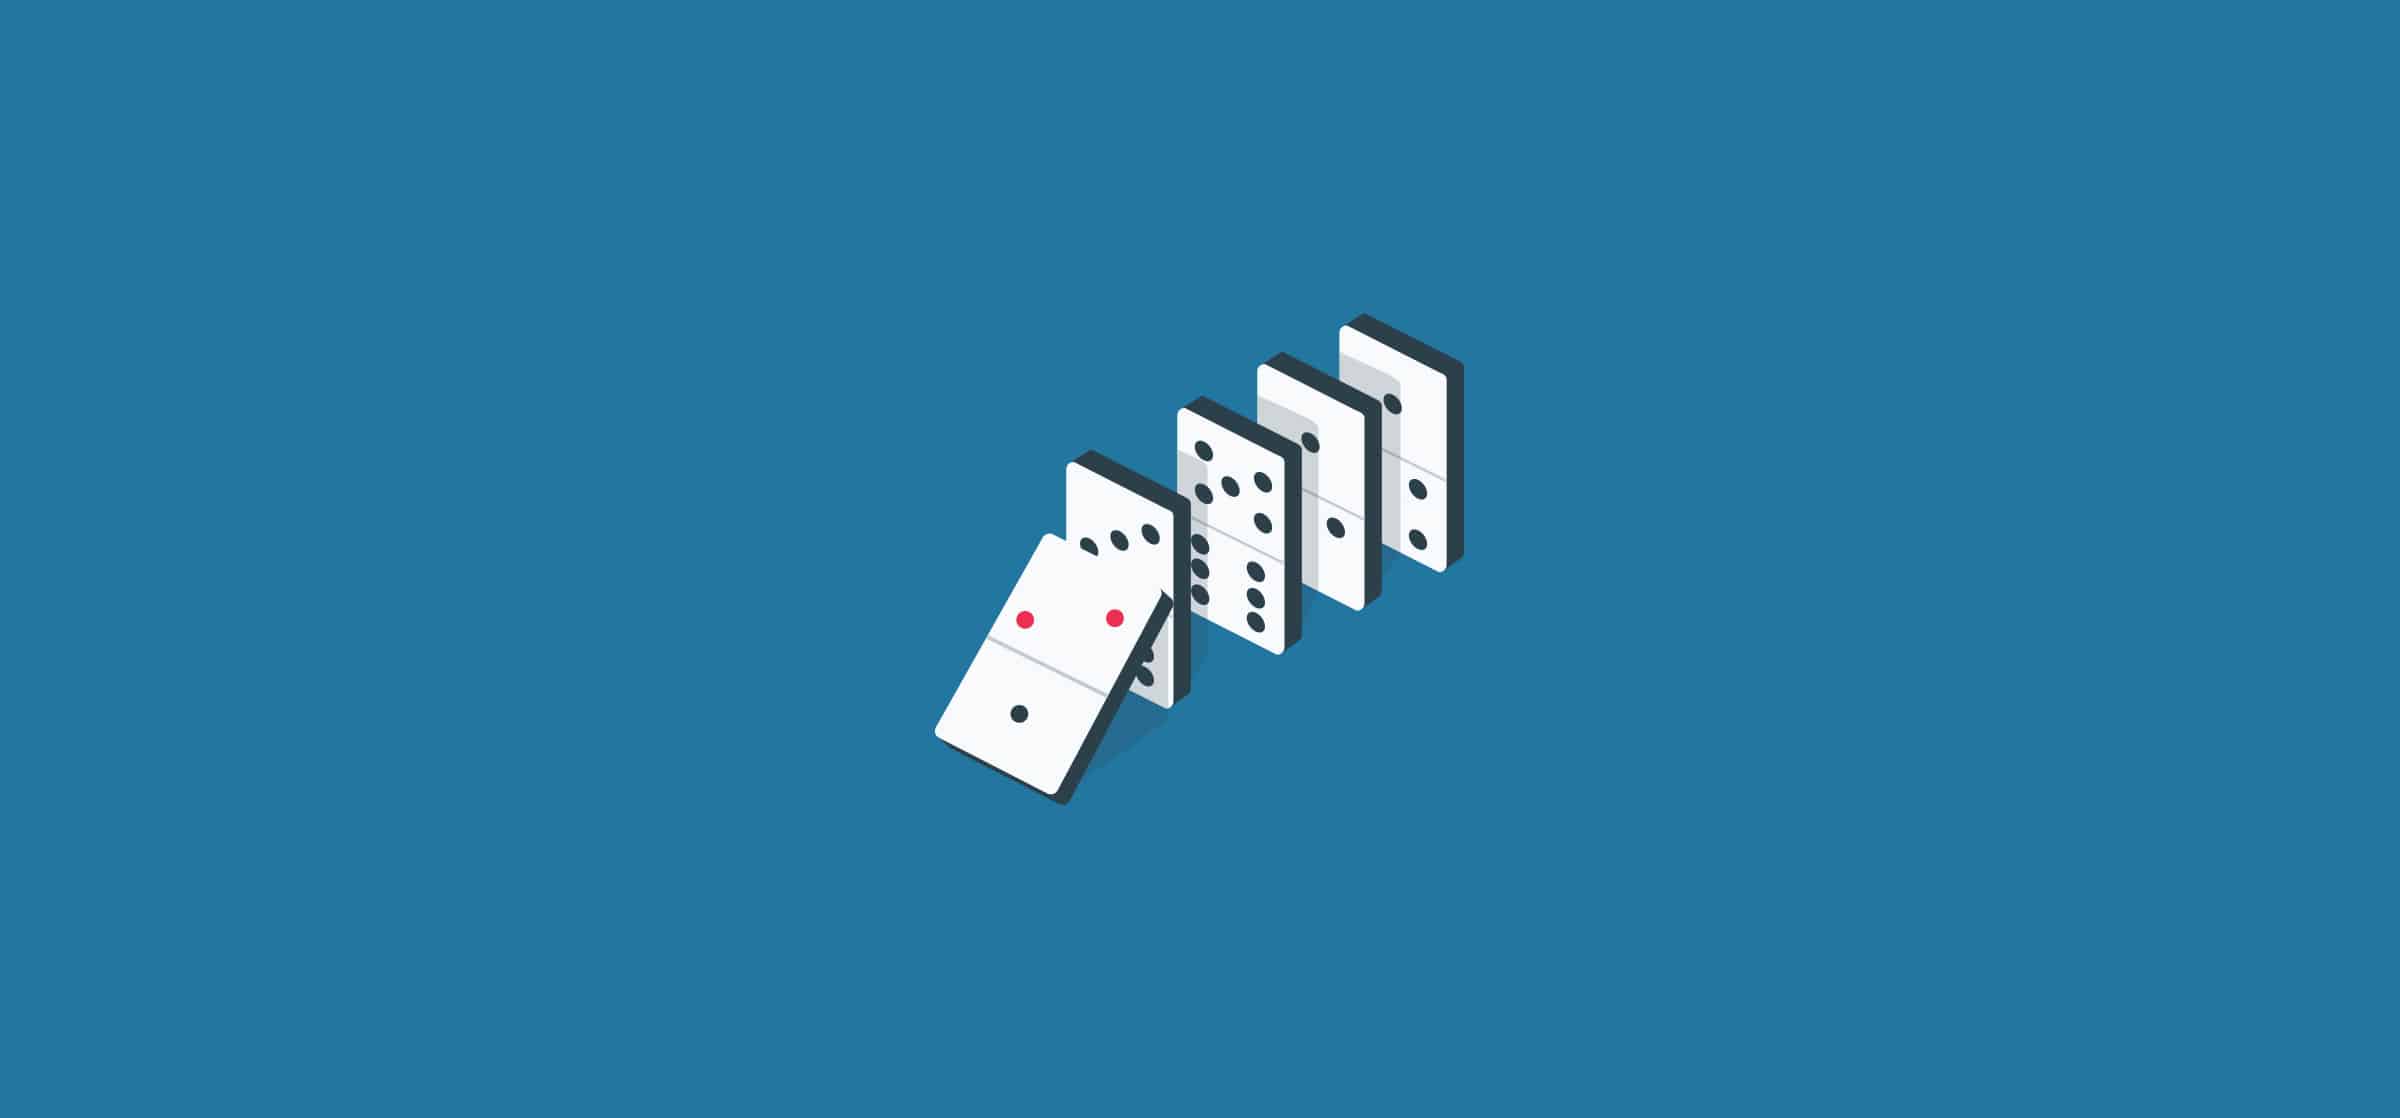 A series of dominos, representing change management